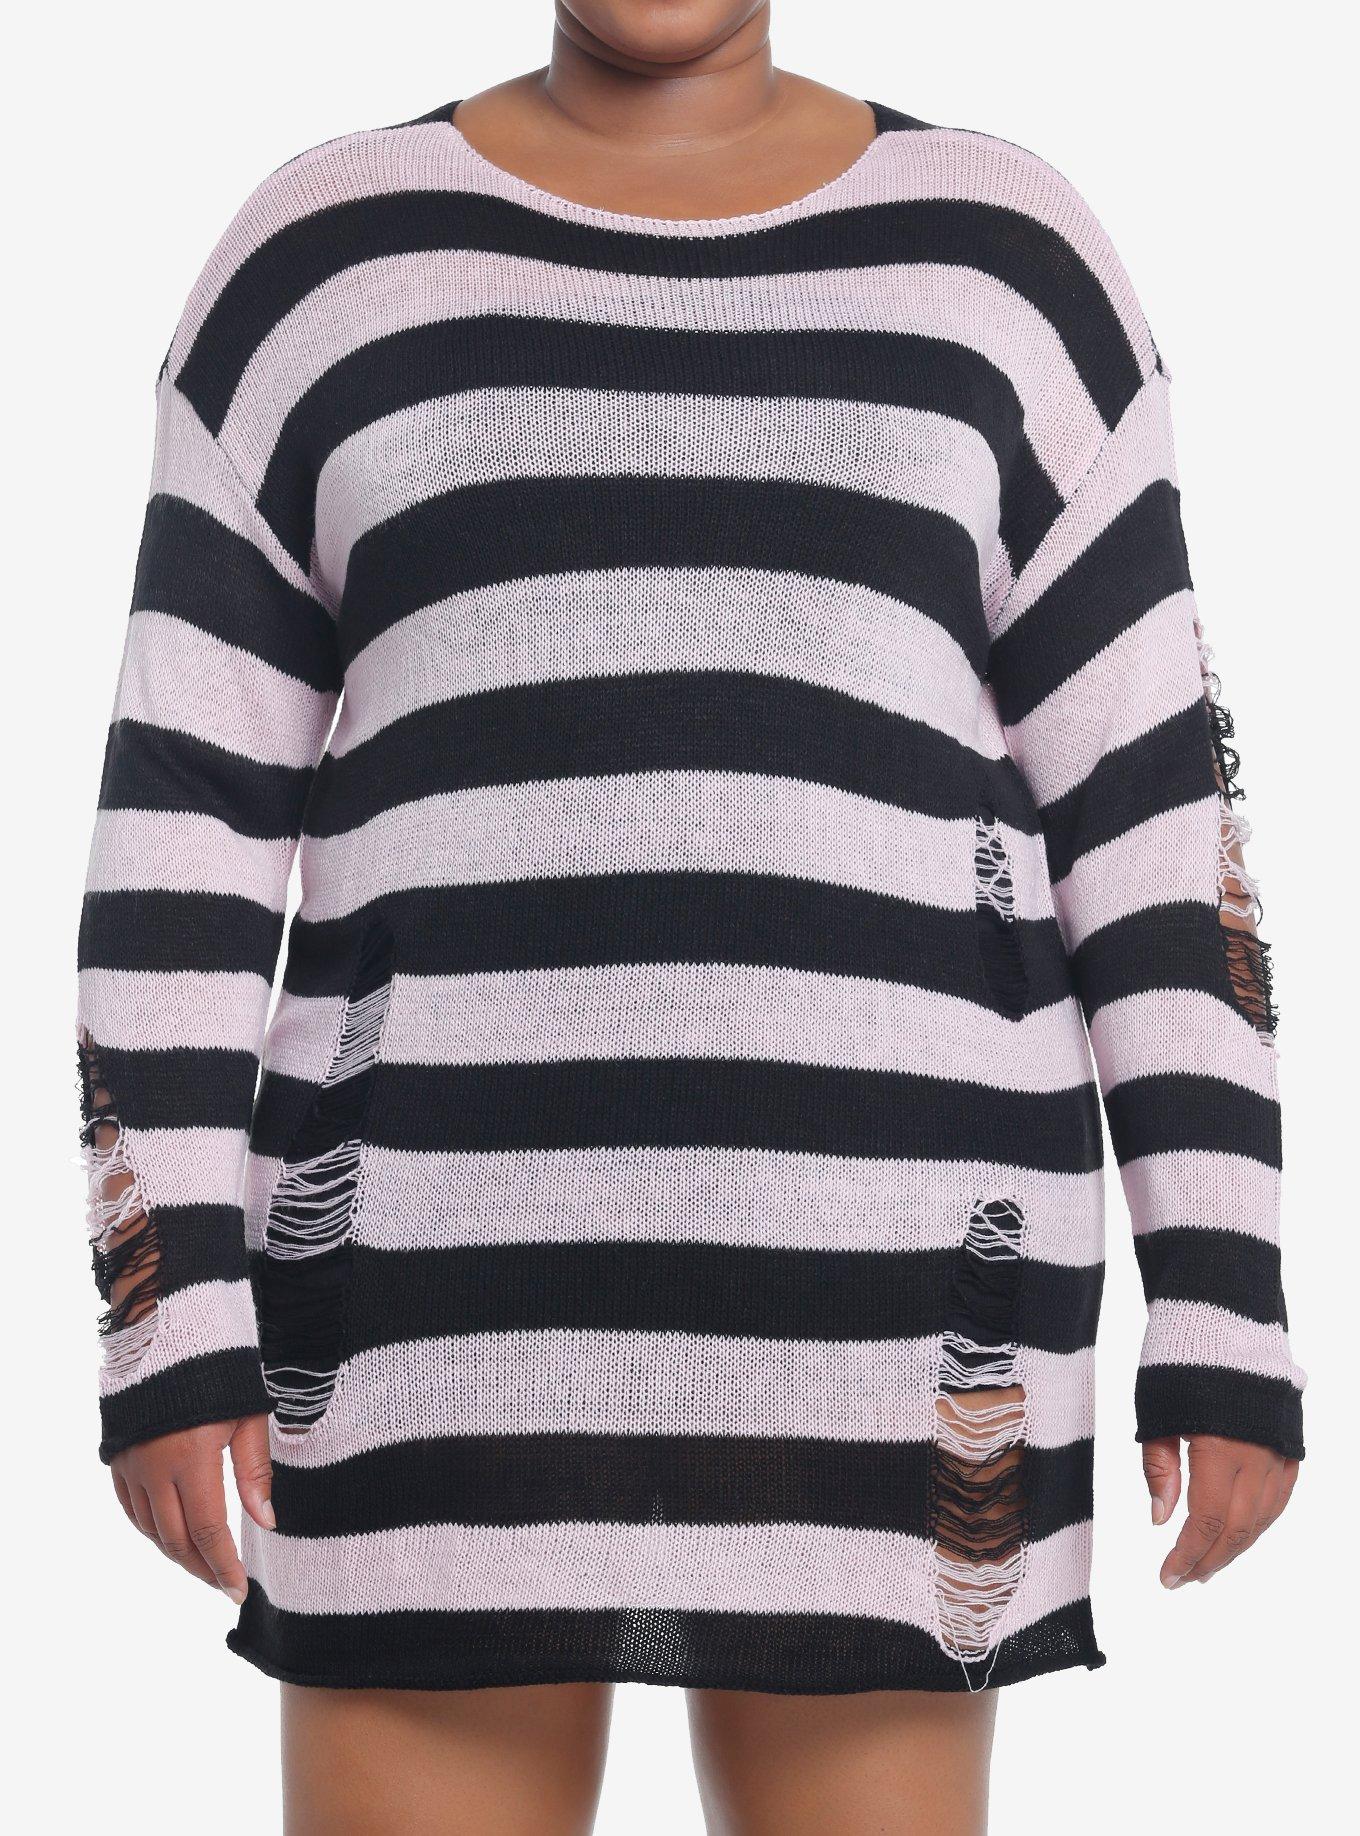 Striped Sweaters For Fall And Winter - Stitch & Salt